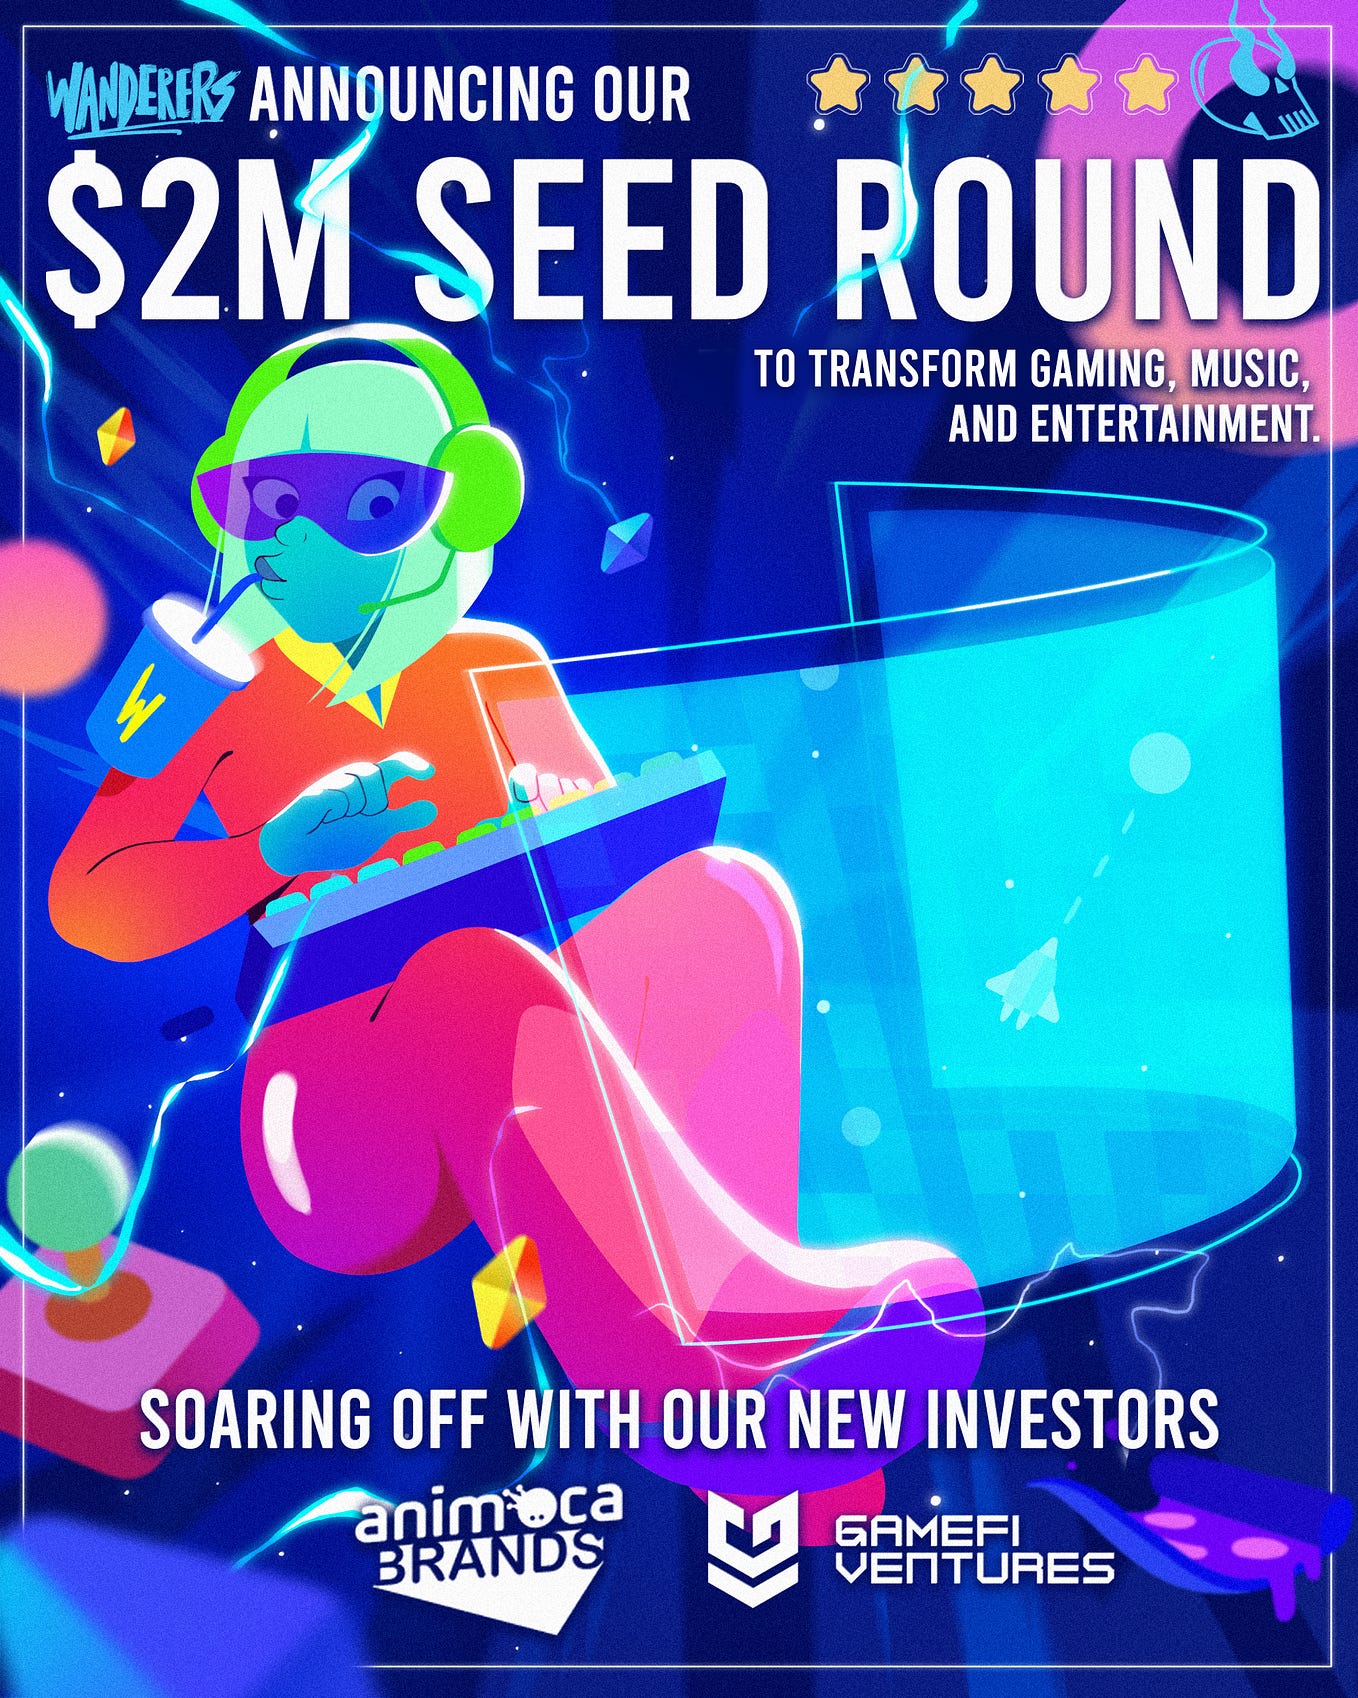 Wanderers raises $2M Seed Round led by Animoca Brands and GameFi Ventures